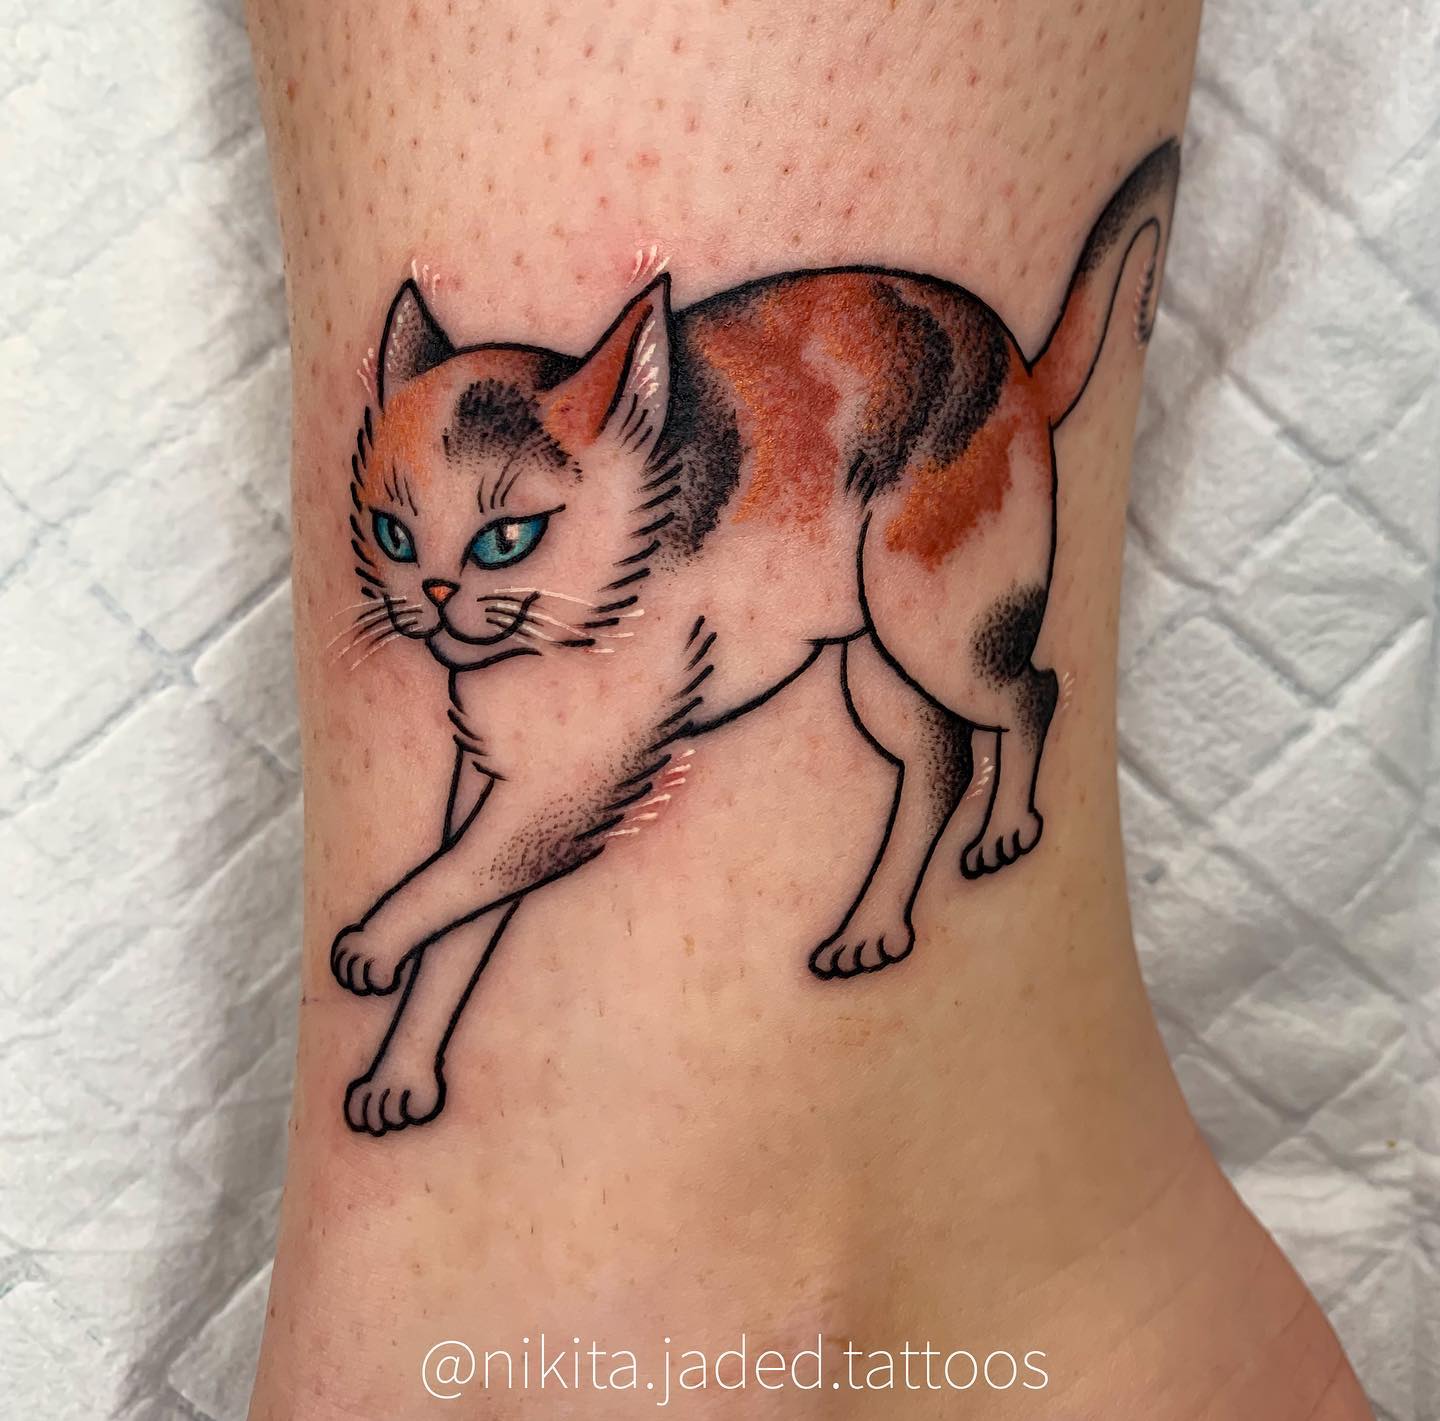 Show your pet that you really love him or her by getting an ankle tattoo on their face. This sweet and cute design will look amazing and is a personal option to go for.